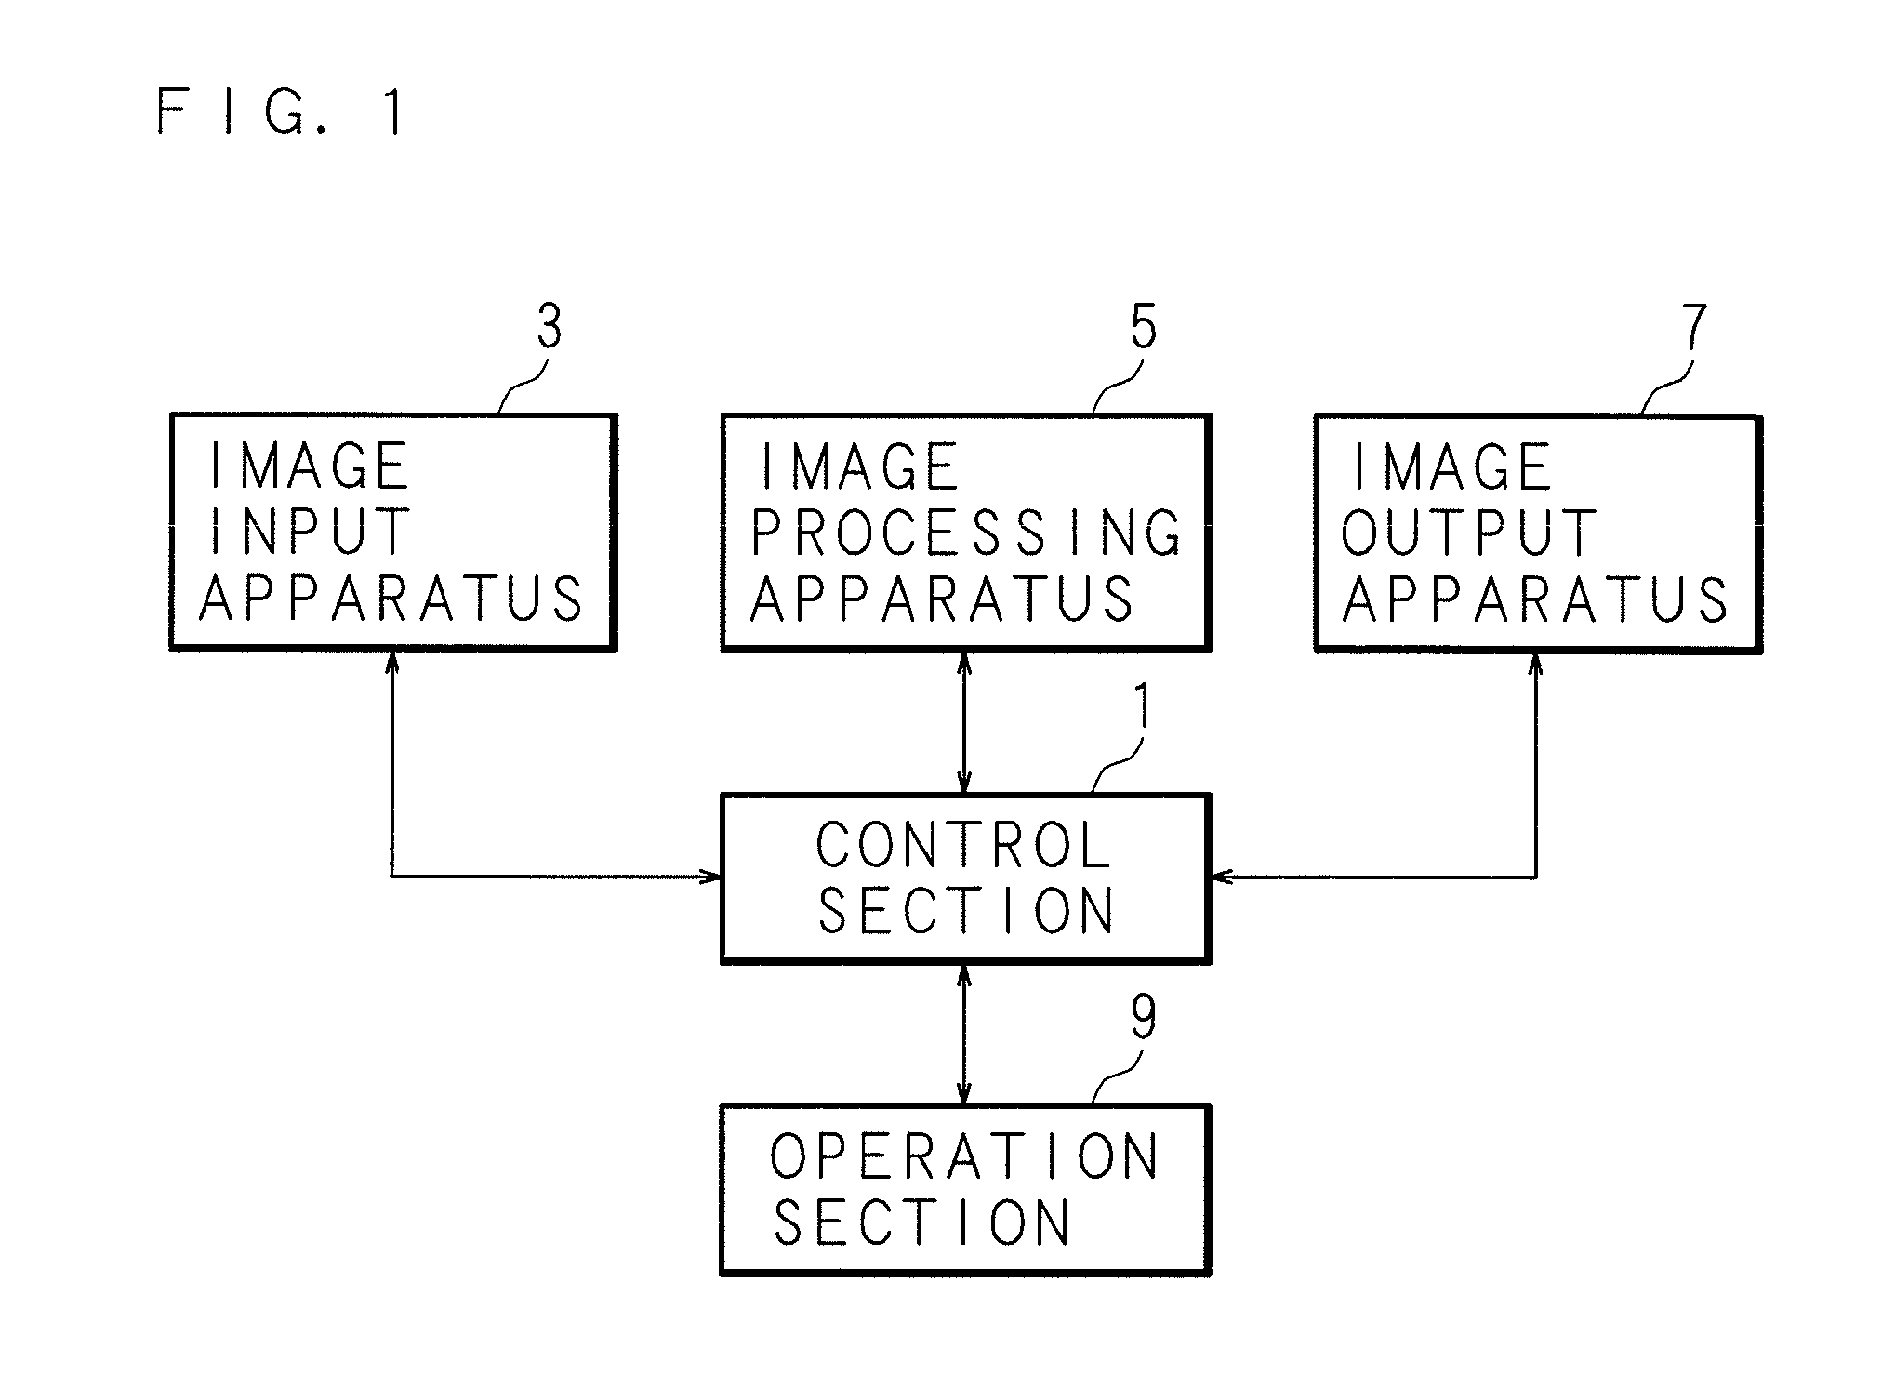 Image processing apparatus that sets a spatial frequency of a chromatic foreground image of a watermark to be lower than a spatial frequency of an achromatic foreground image of a comparable watermark, associated image forming apparatus, image processing method and recording medium